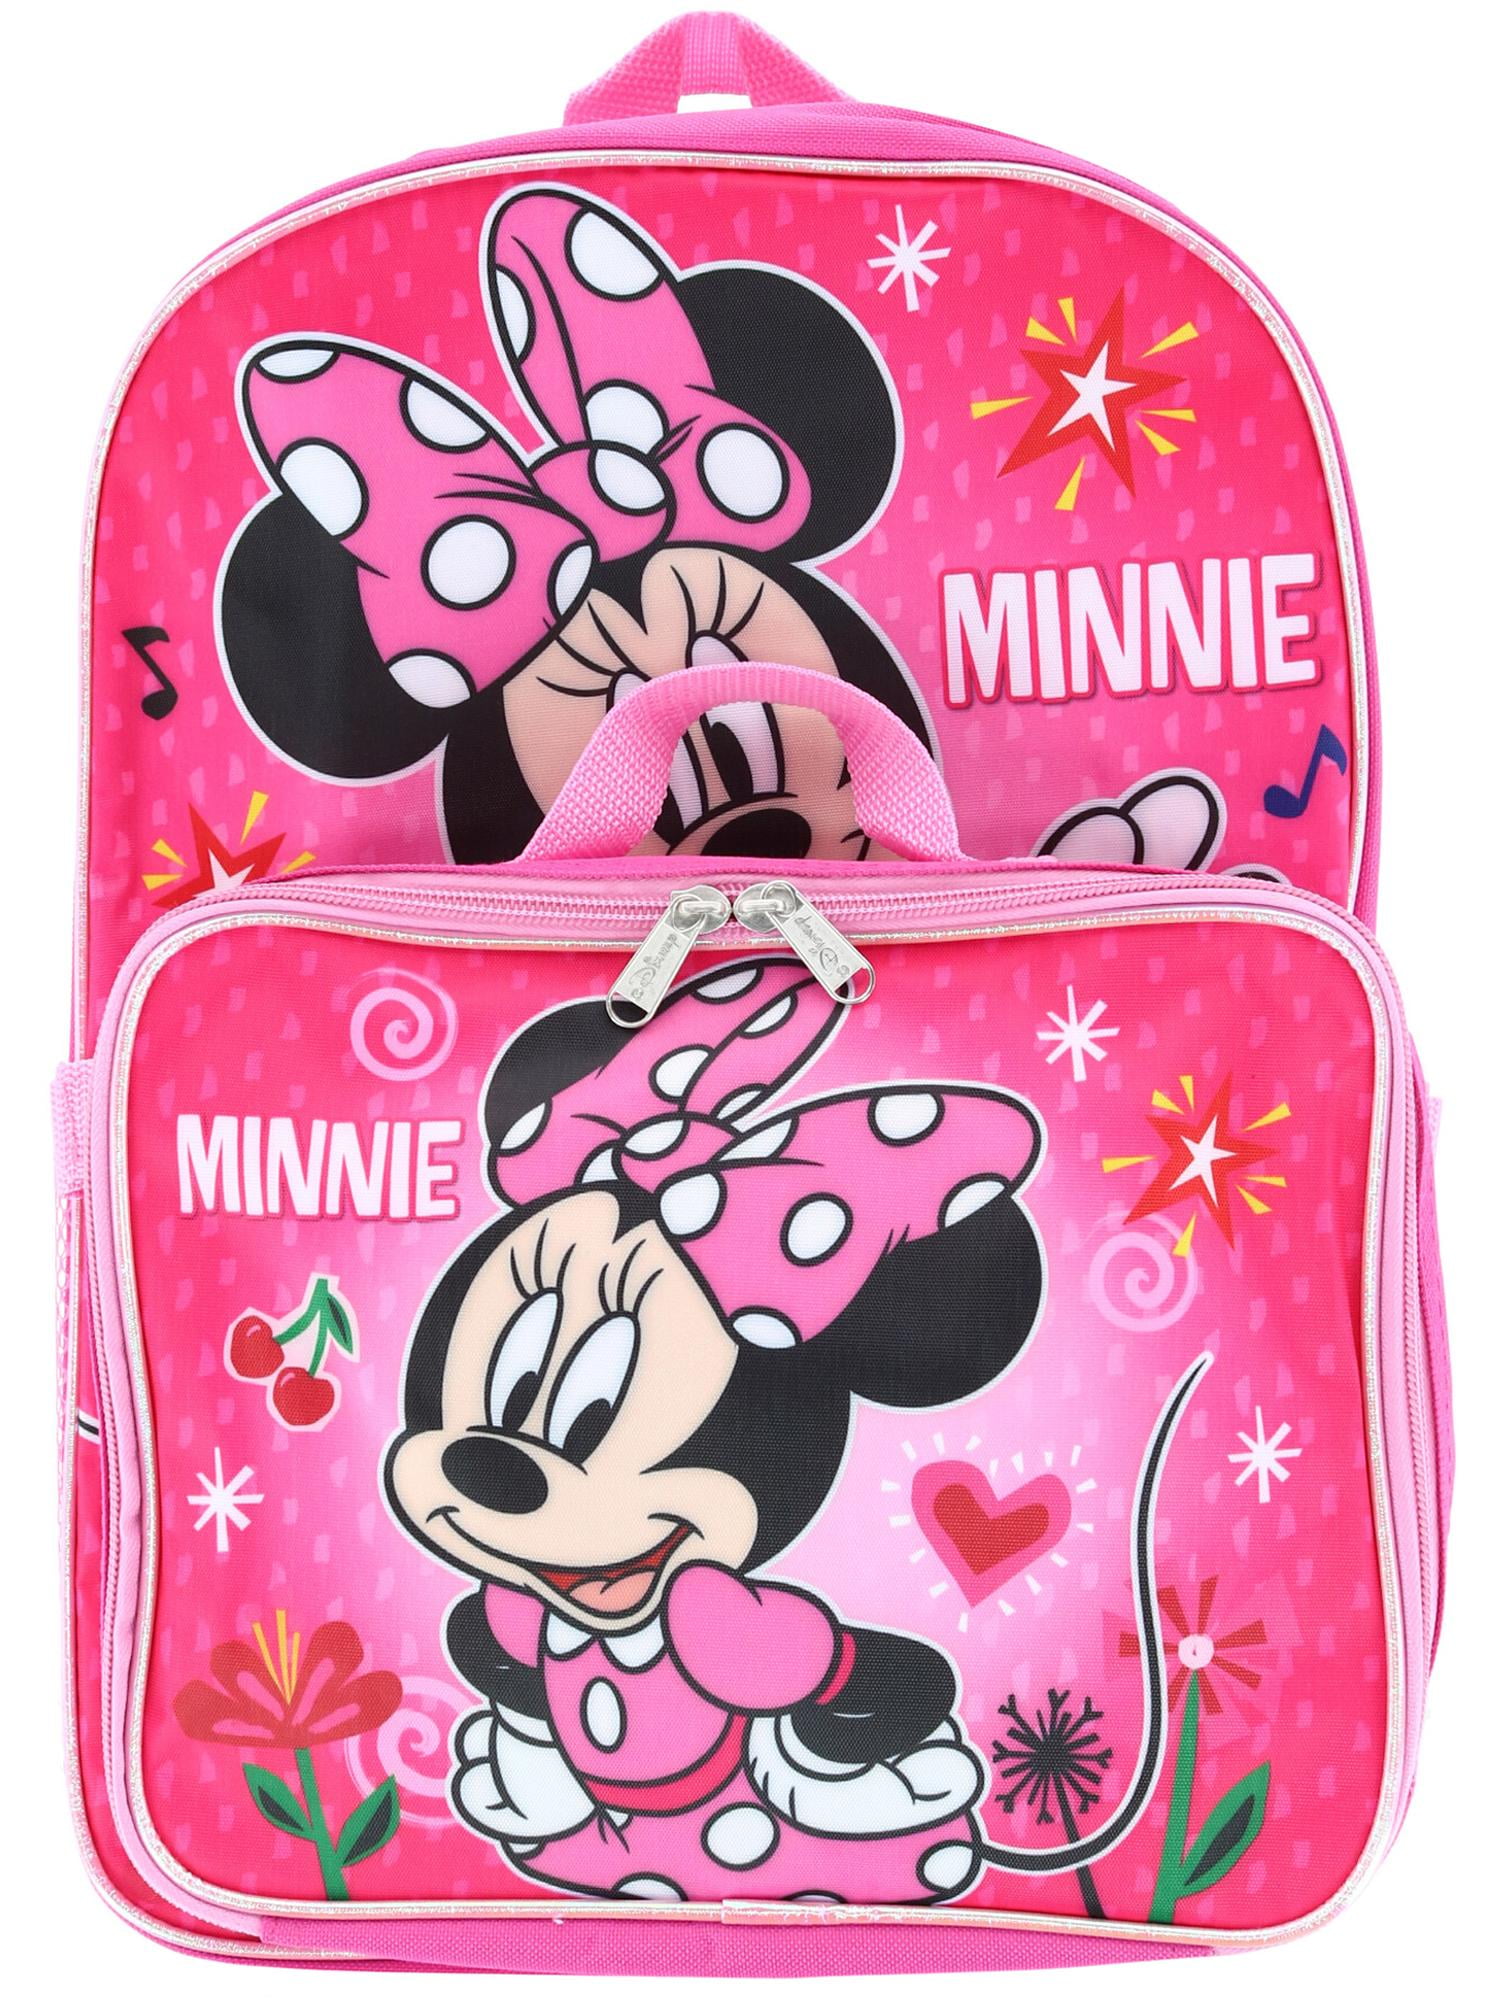 Nice Day Plus Lunch Bag Minnie Mouse 12" Toddler Size Backpack 